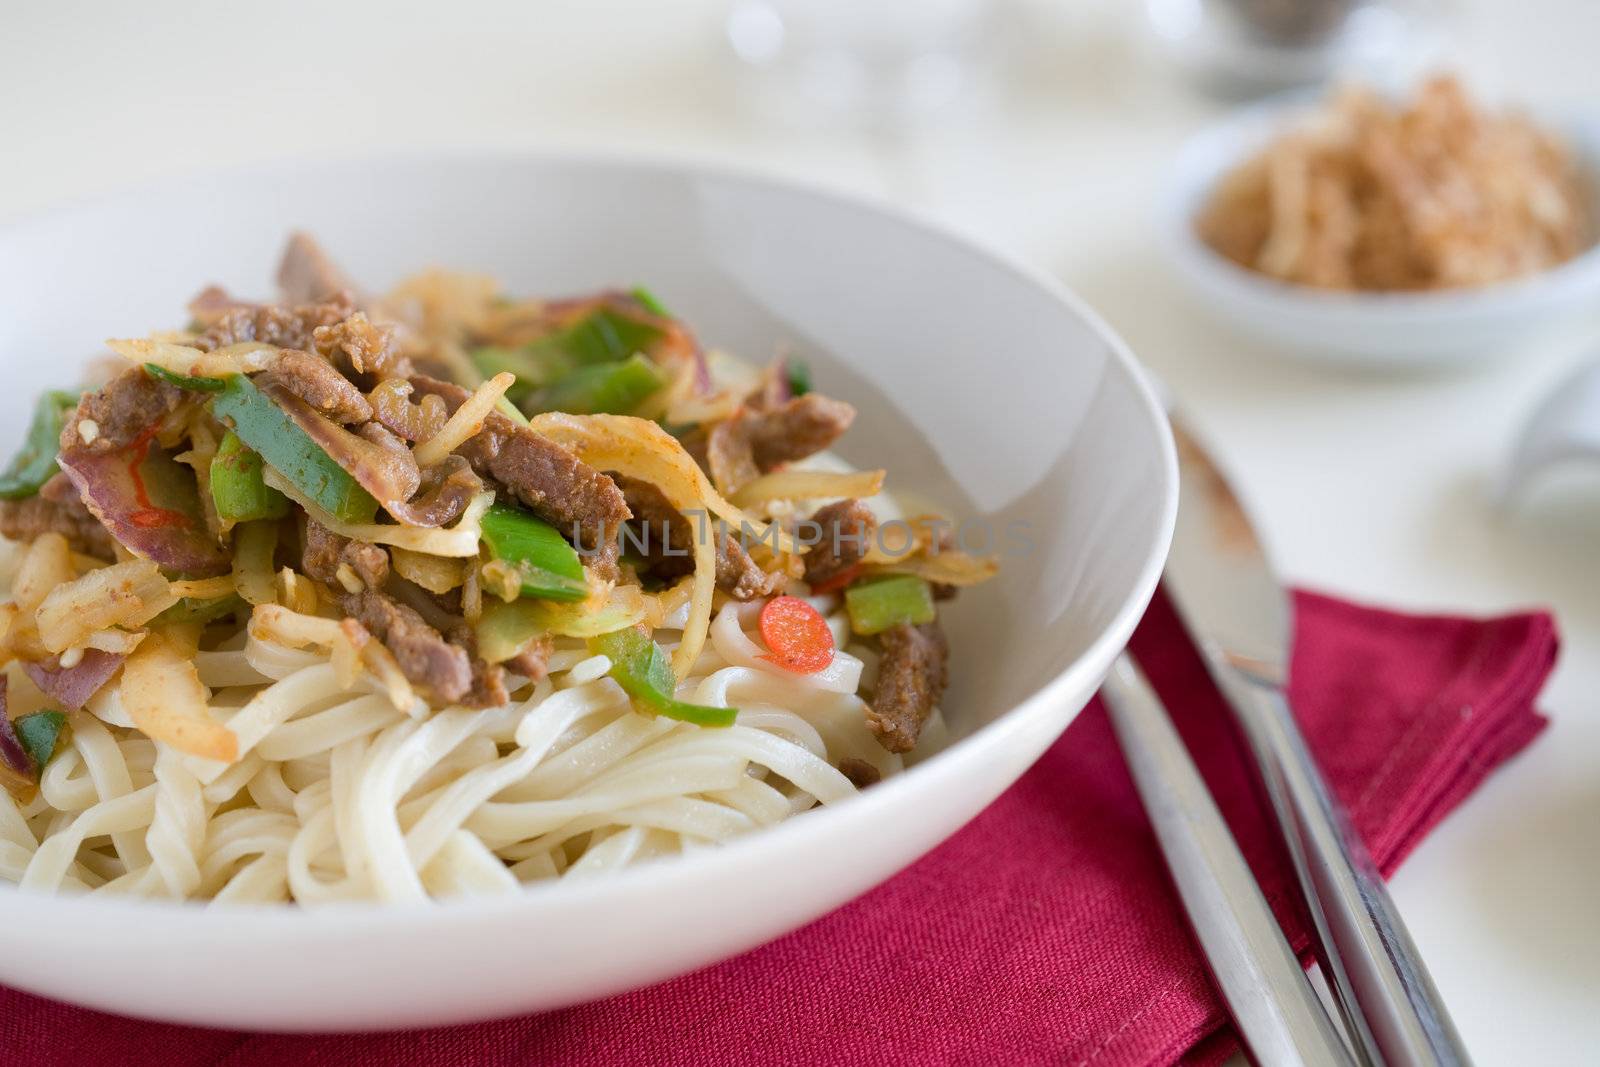 Delicious noodle dish with beef and vegetables